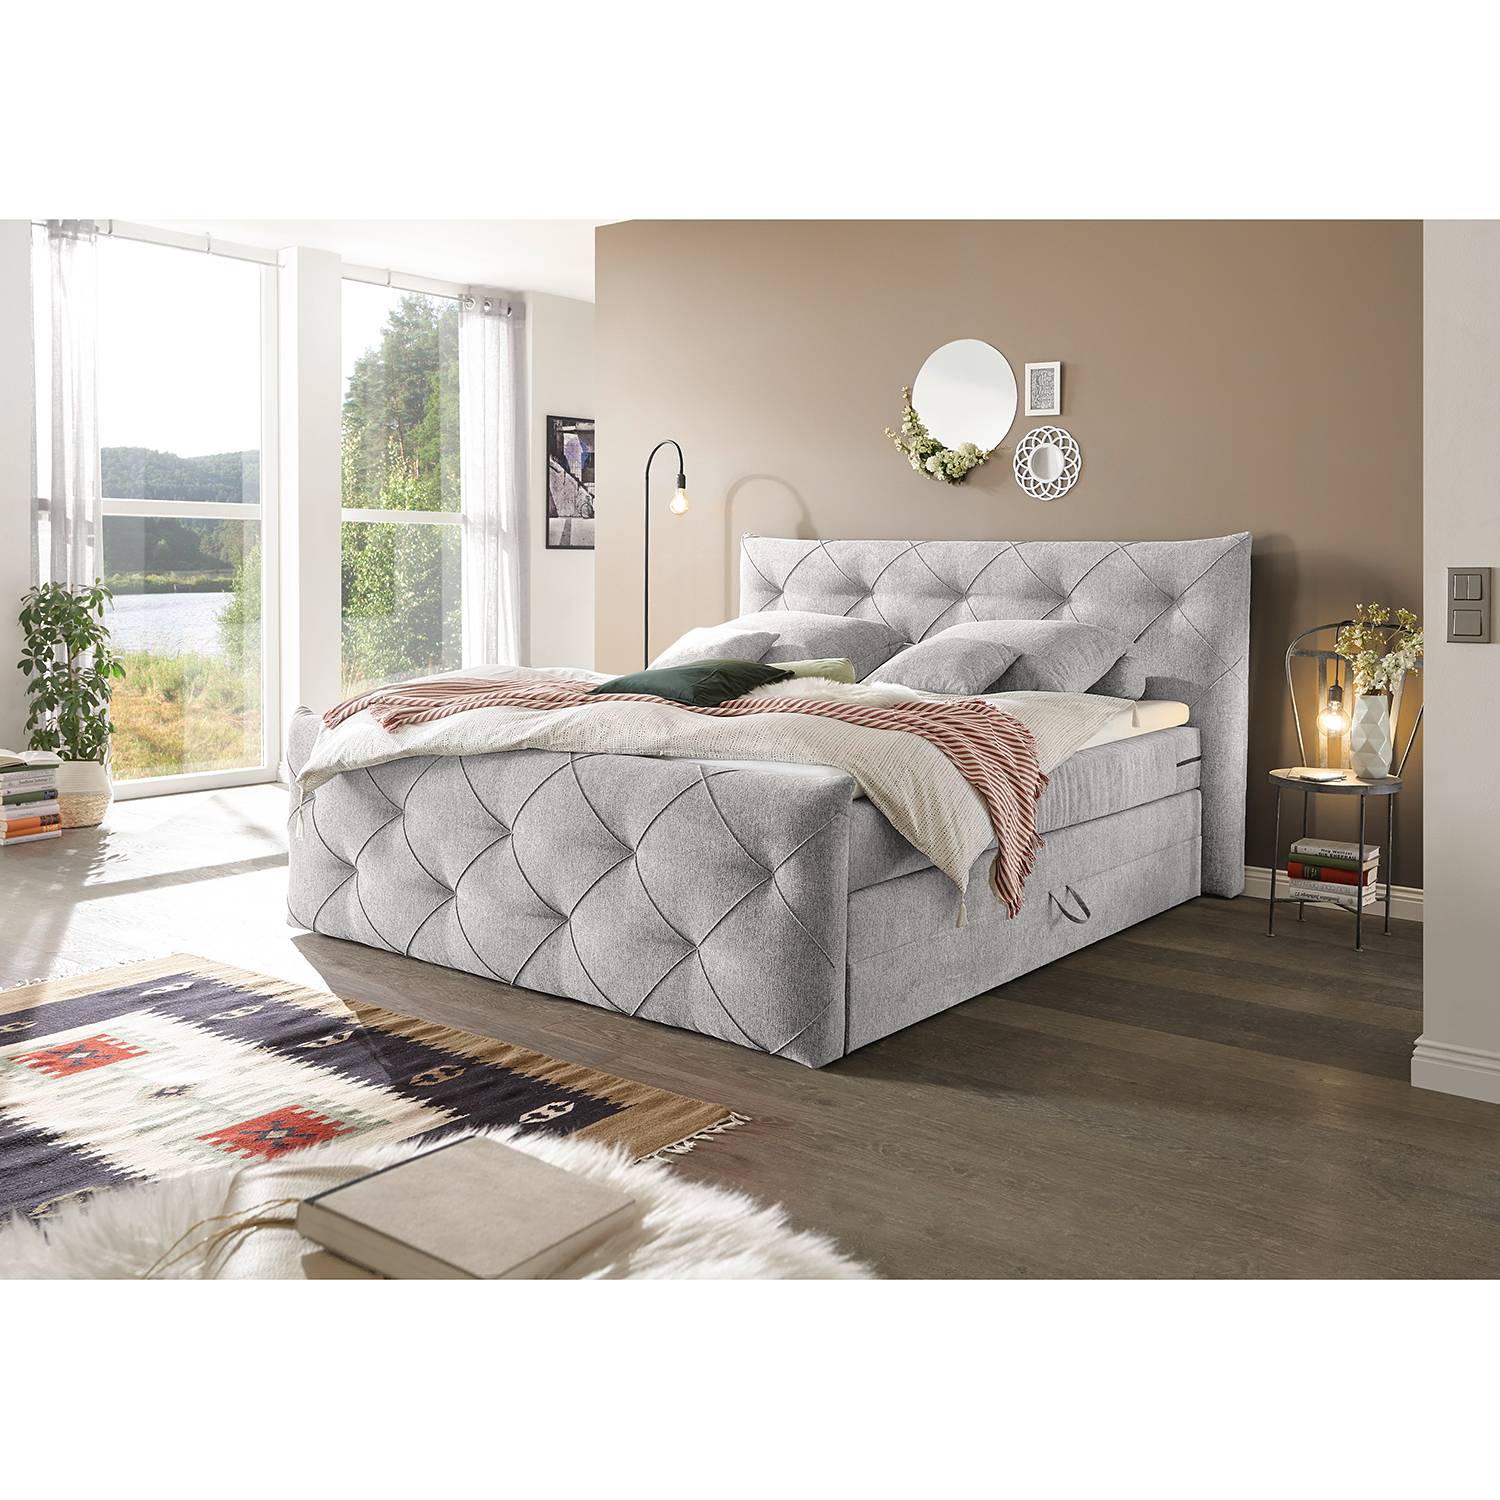 Lit boxspring Bellvue